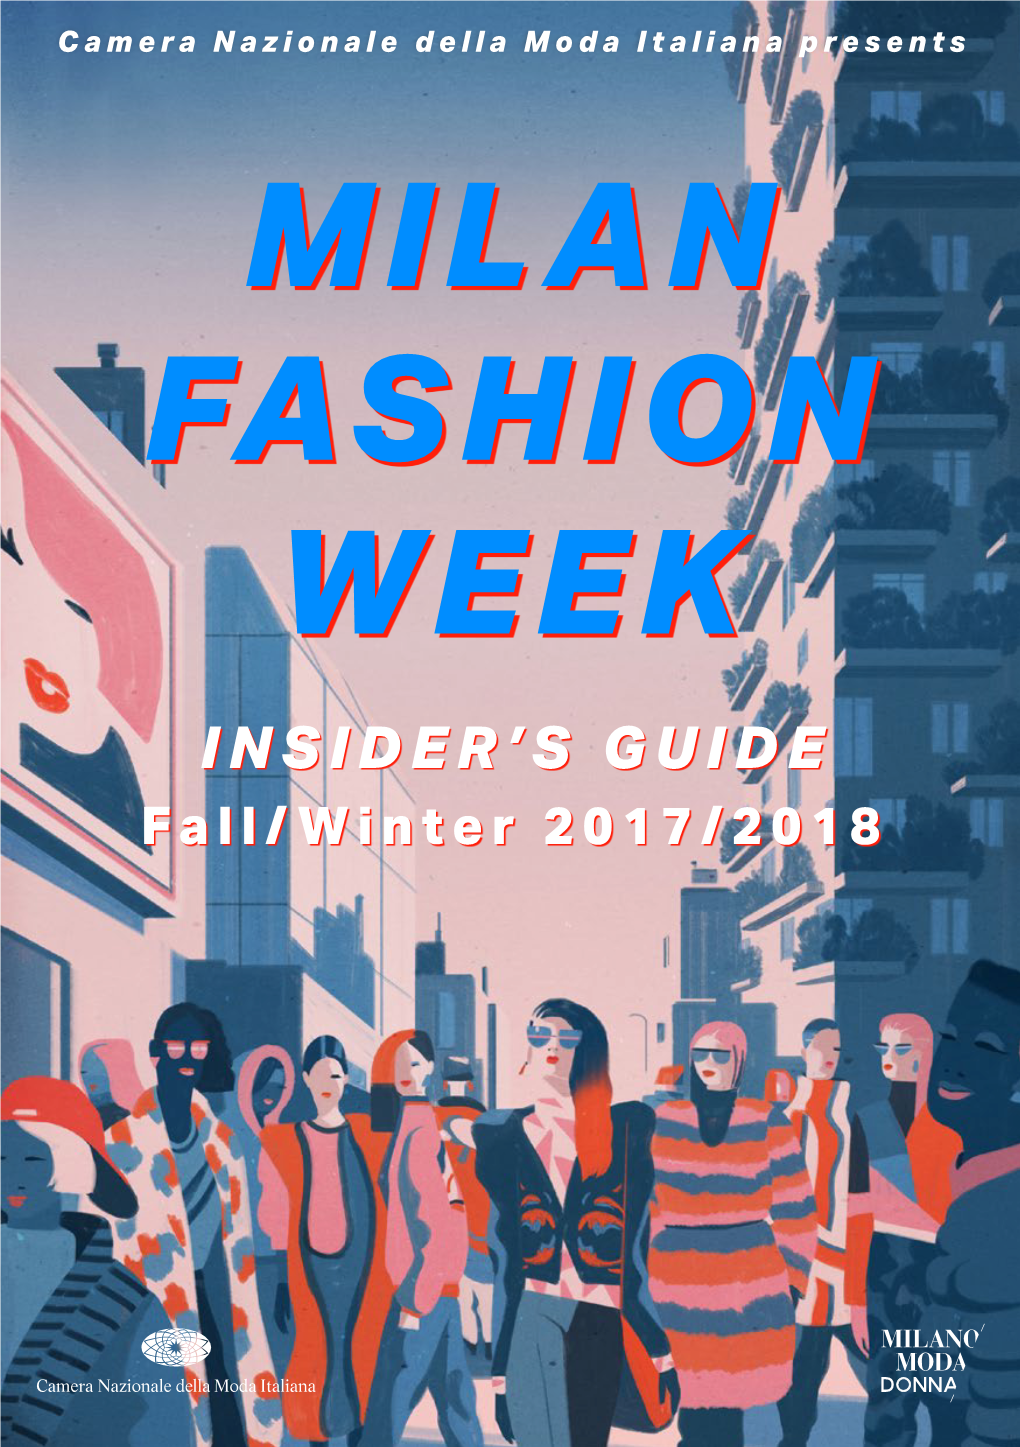 MILAN FASHION WEEK INSIDER’S GUIDE Fall/Winter 2017/2018 LETTER from the CHAIRMAN